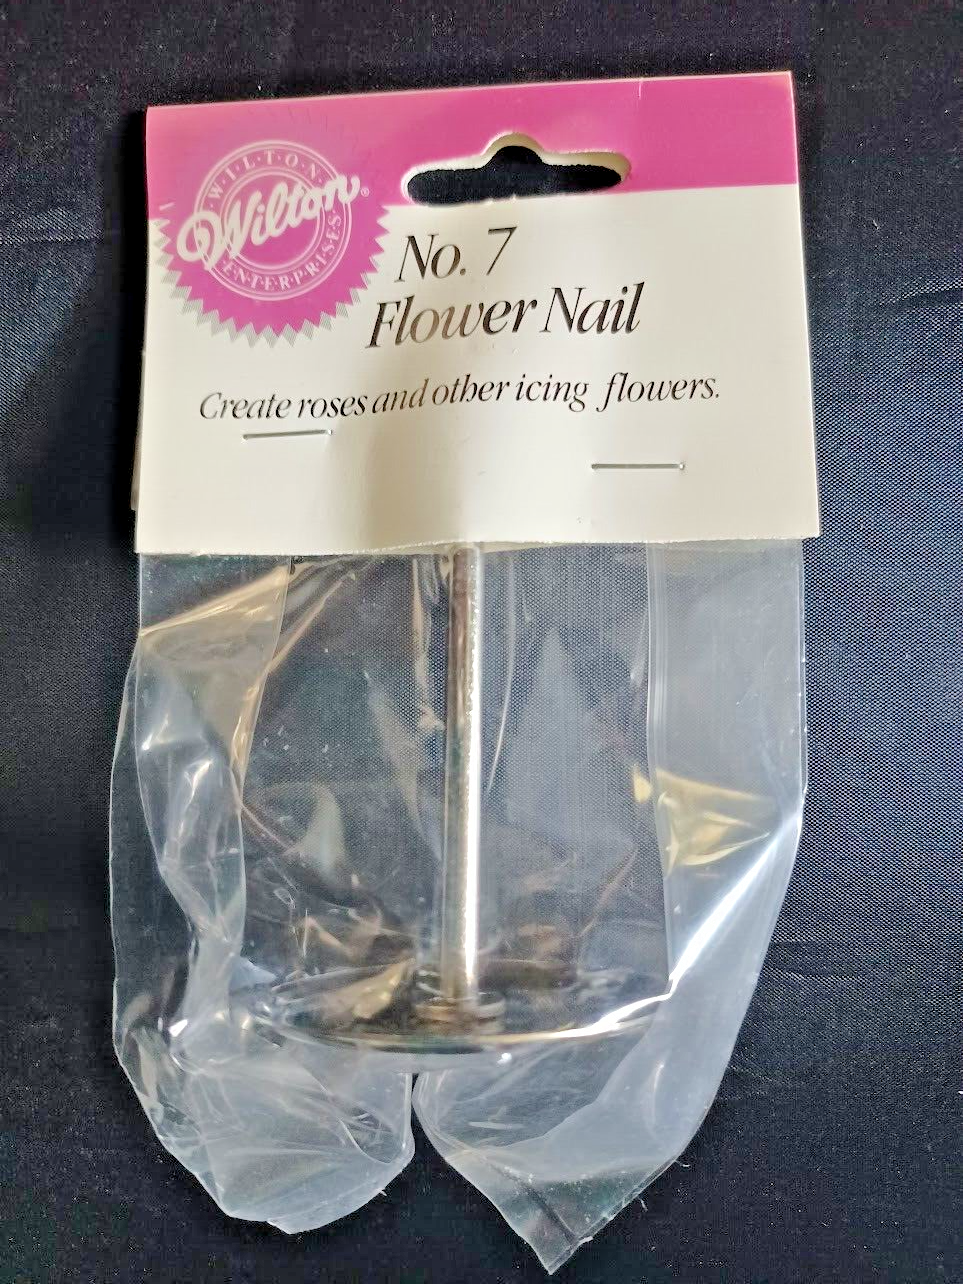 No 7 Flower Nail from Wilton 3007 NEW Create Roses & Icing Flowers 1 1/2" Diam. - $8.59